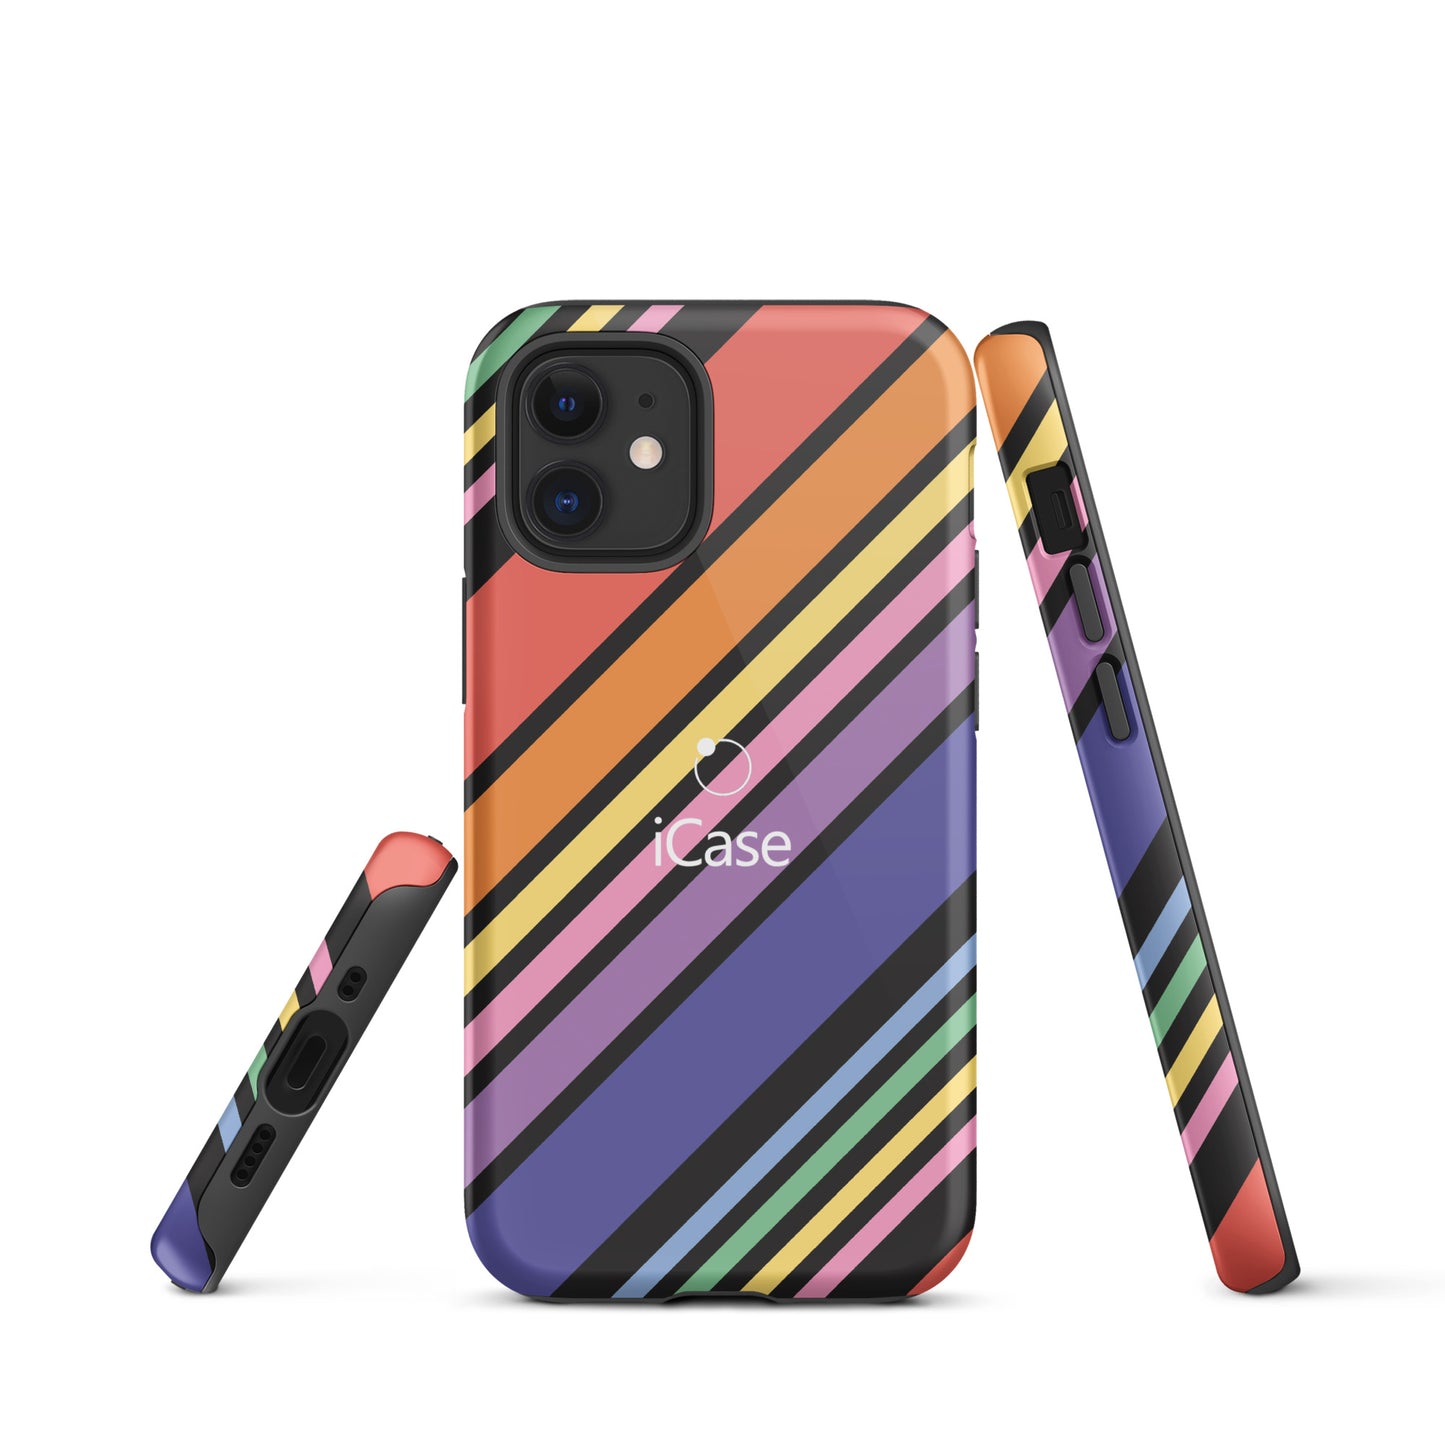 iCase Couleurs HardCase Coque pour iPhone